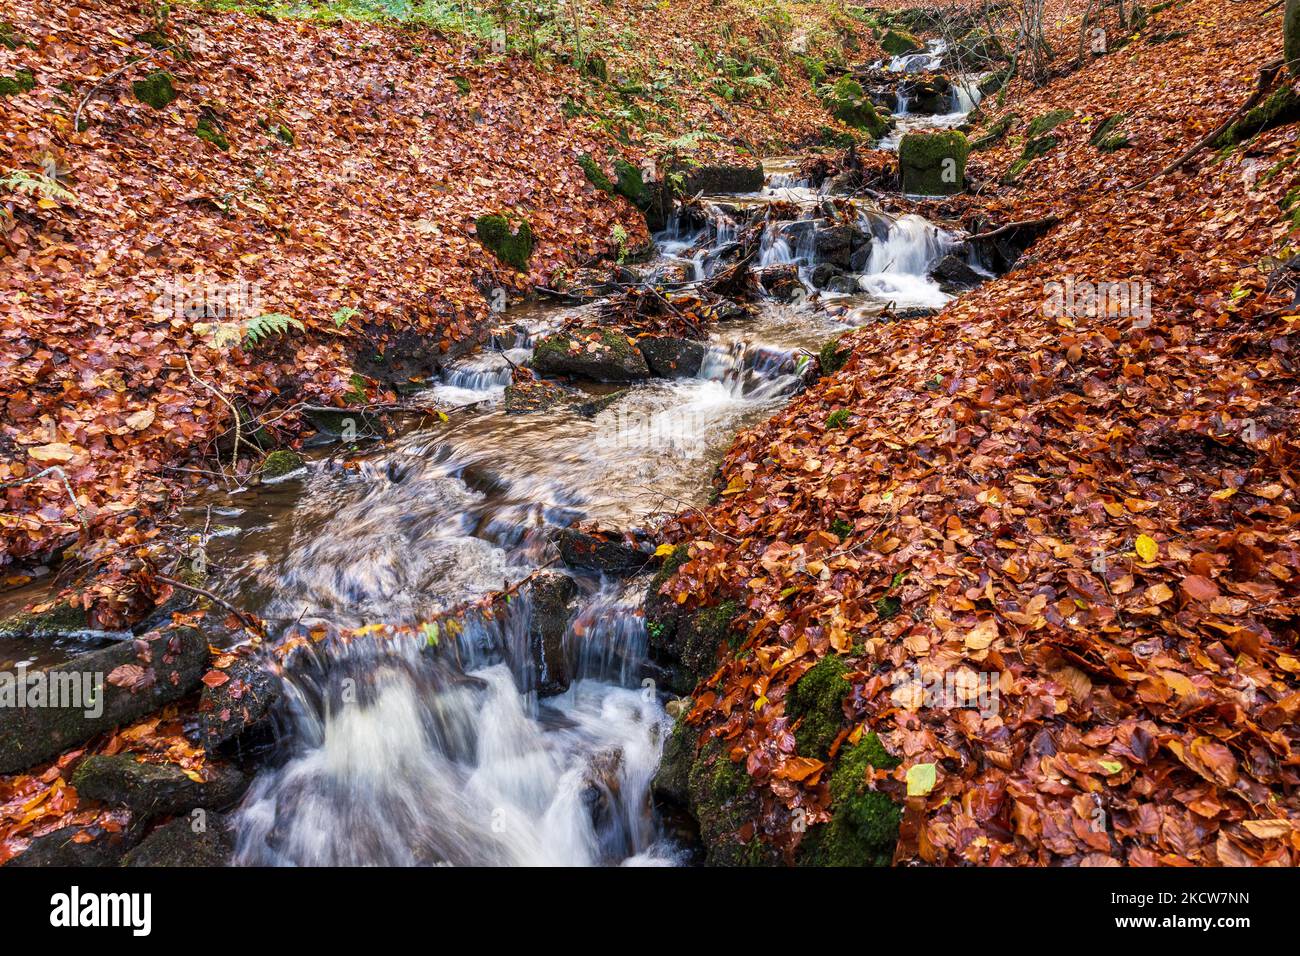 The Porter River rises on the edge of the Peak District and flows through Sheffield to the river Don. The upper reaches in autumn are carpeted with be Stock Photo